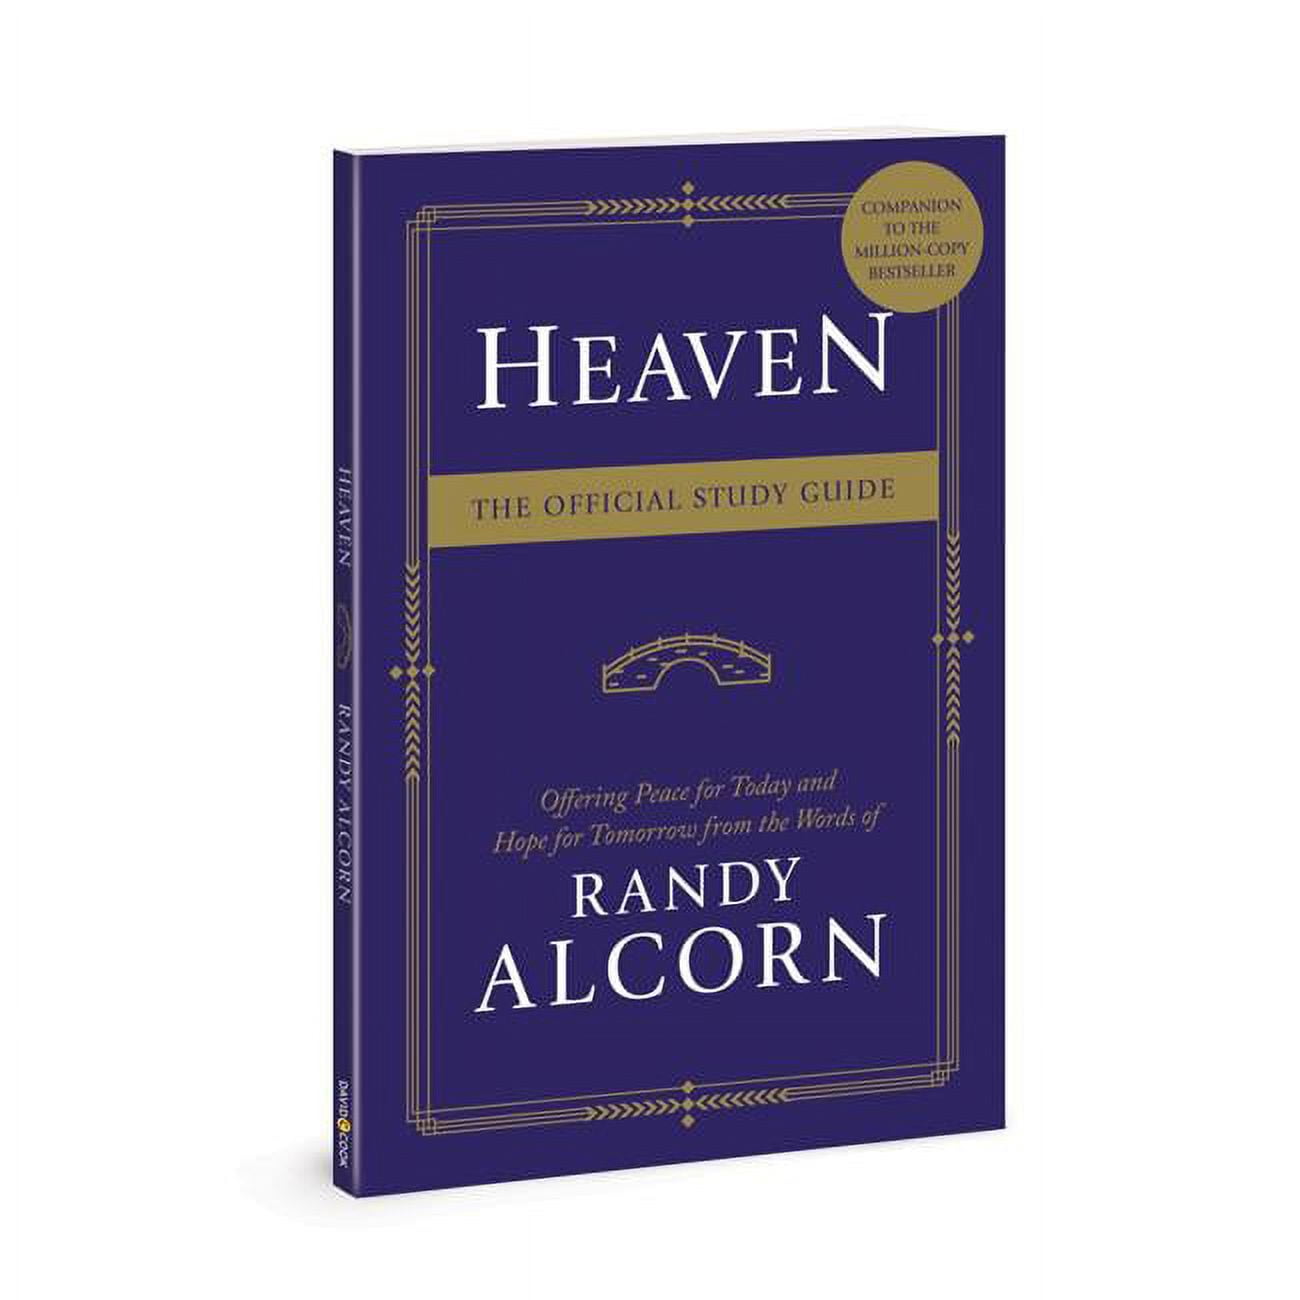 143134 Heaven The Official Study Guide